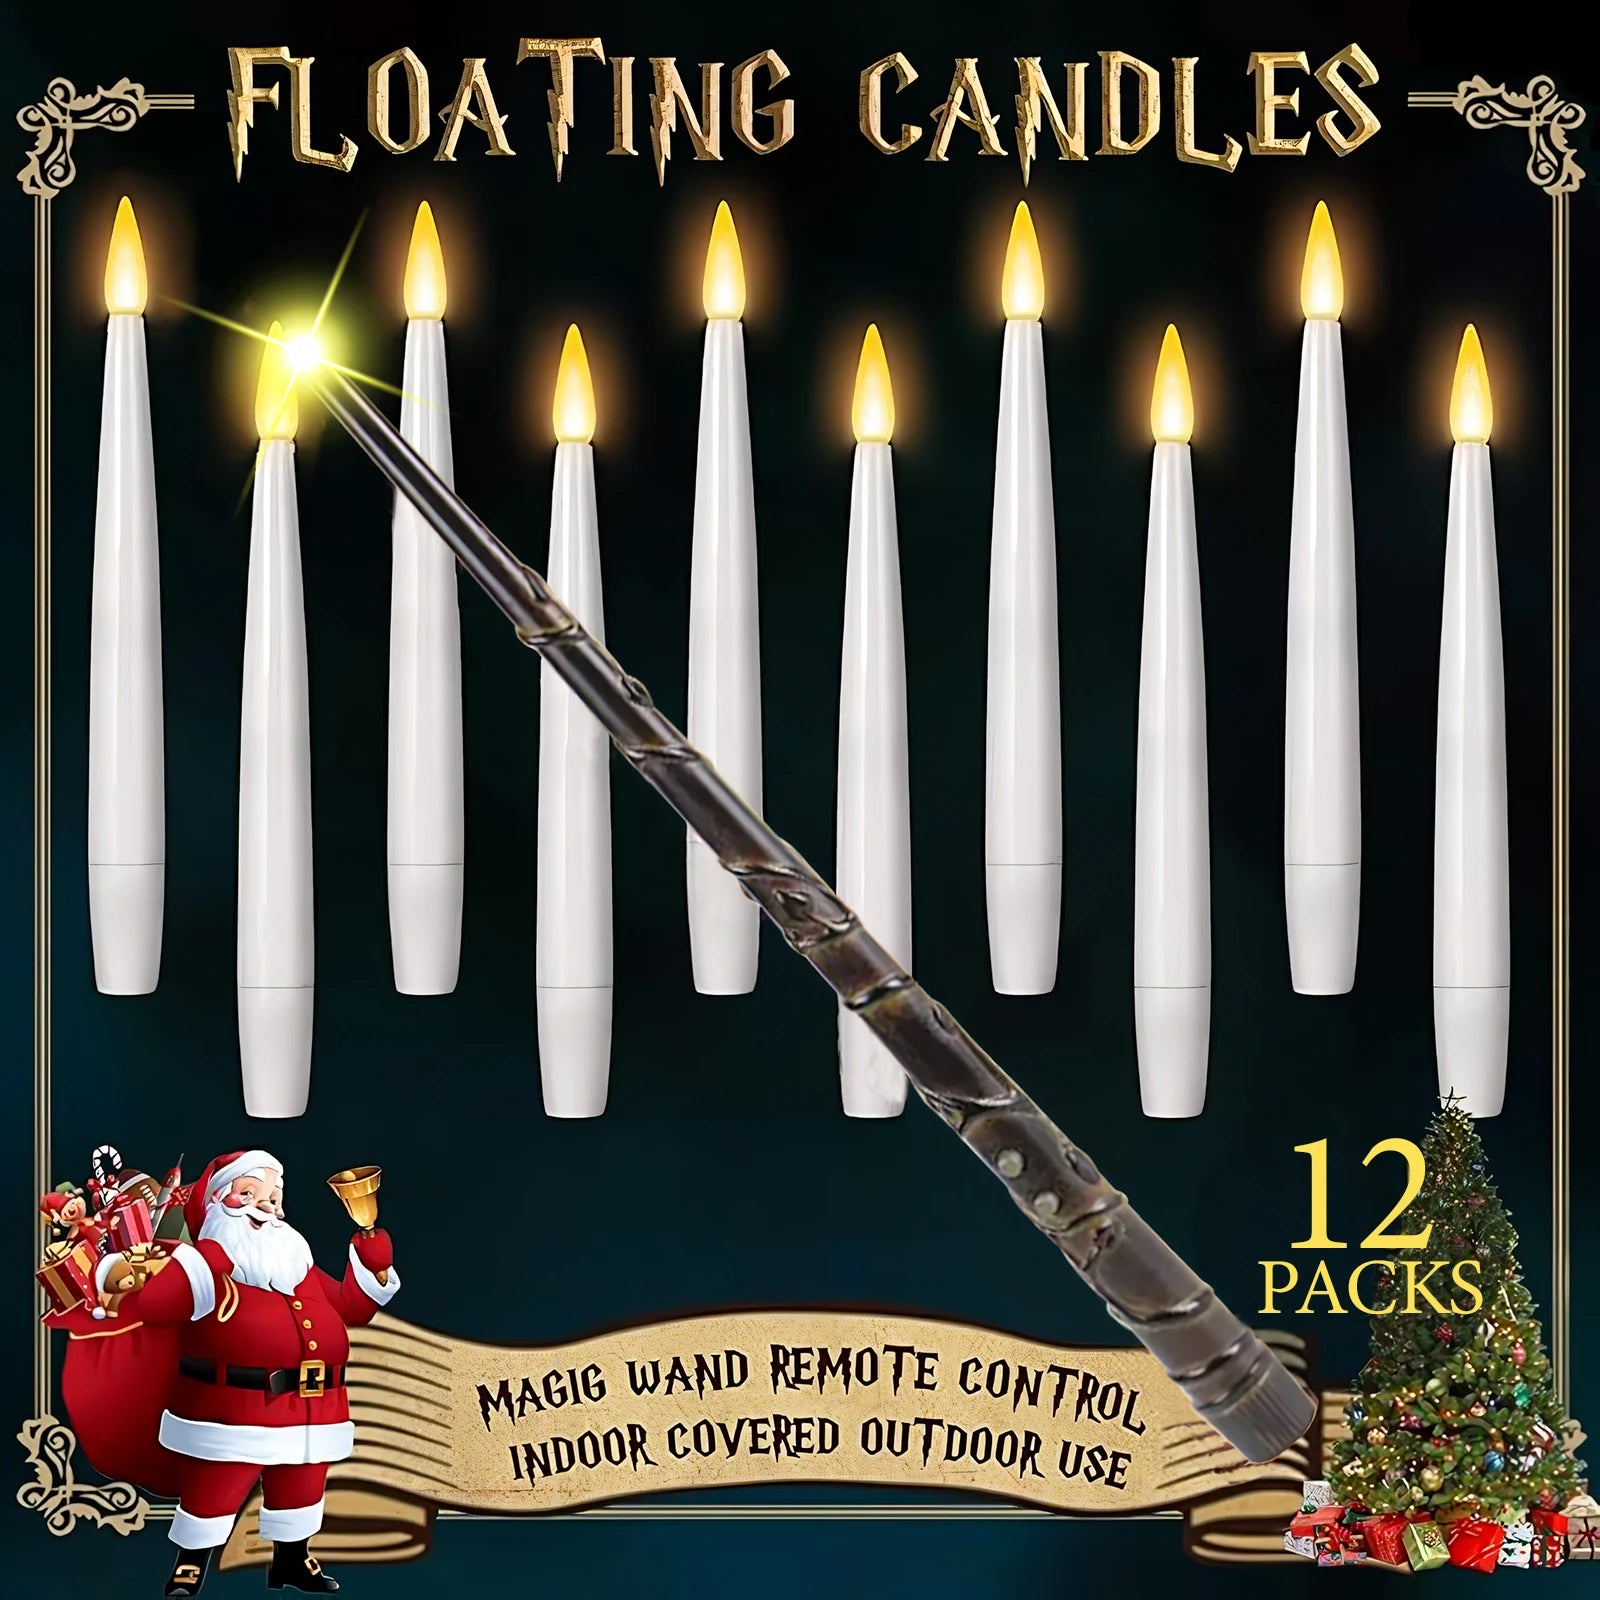 12-48 Floating Candles with Magic Wand Christmas Flying Candle Flameless Candles Battery Remote Candle Witch Wizard Party Decor